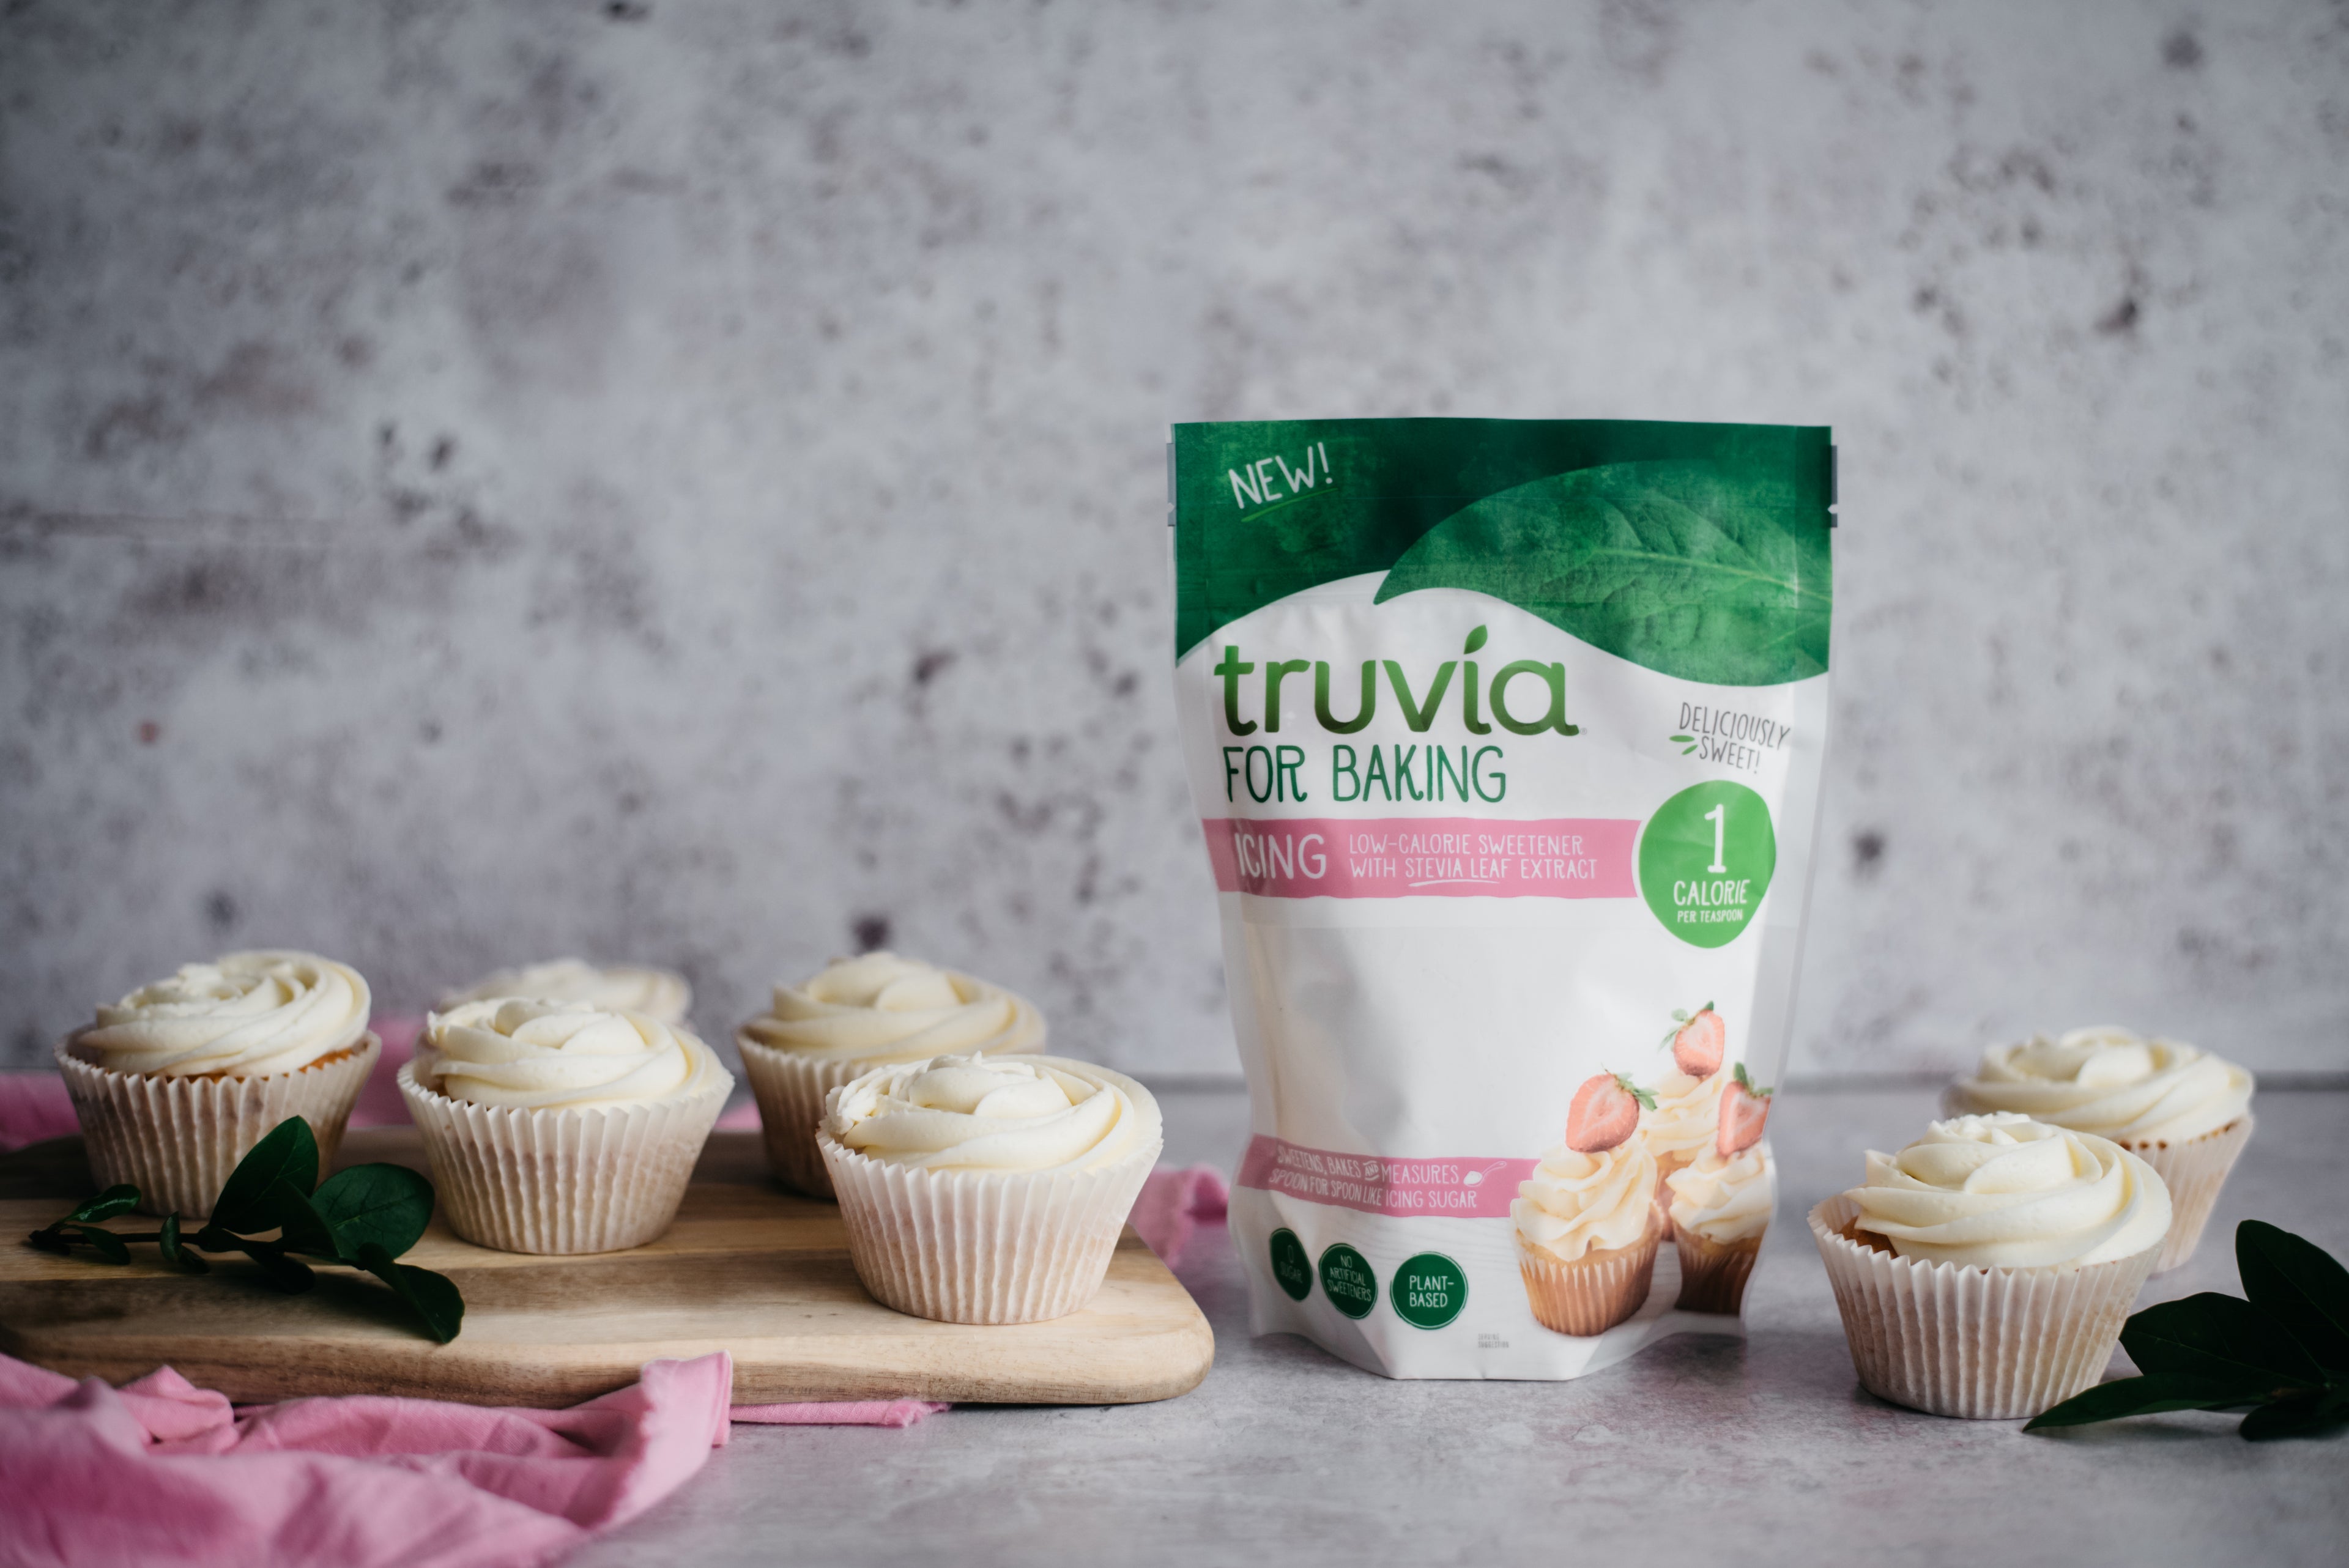 Four cupcakes covered in low sugar cream cheese frosting next to a pack of Truvia for Baking - Icing